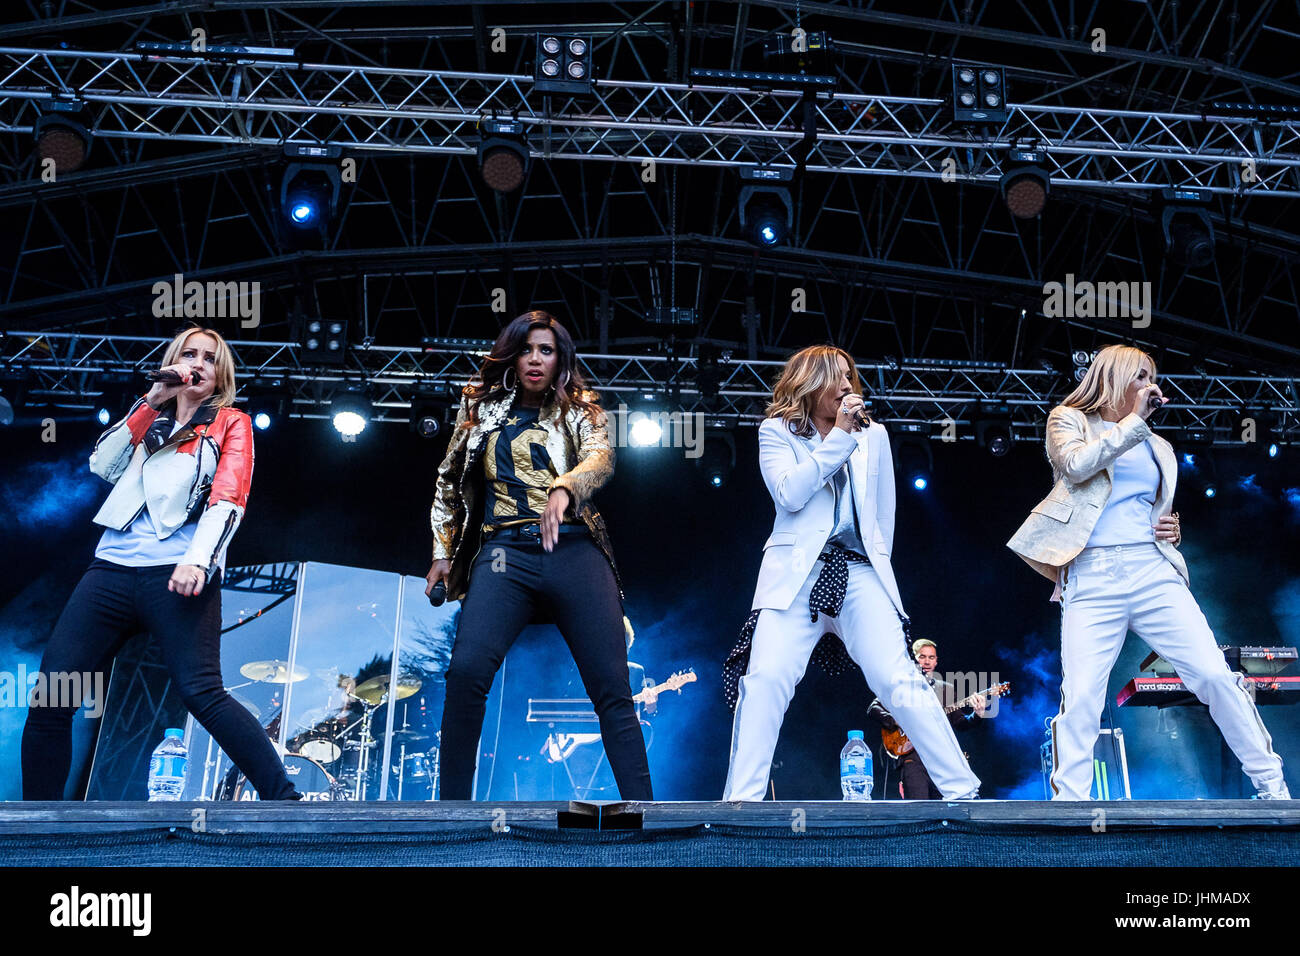 London, UK. 13th July, 2017. All Saints plays Kew the Music at Kew Gardens on 13/07/2017 at Kew the Music at Kew Gardens, London. Persons pictured: Nicole Appleton, Melanie Blatt, Shaznay Lewis, Natalie Appleton. Picture by Credit: Julie Edwards/Alamy Live News Stock Photo